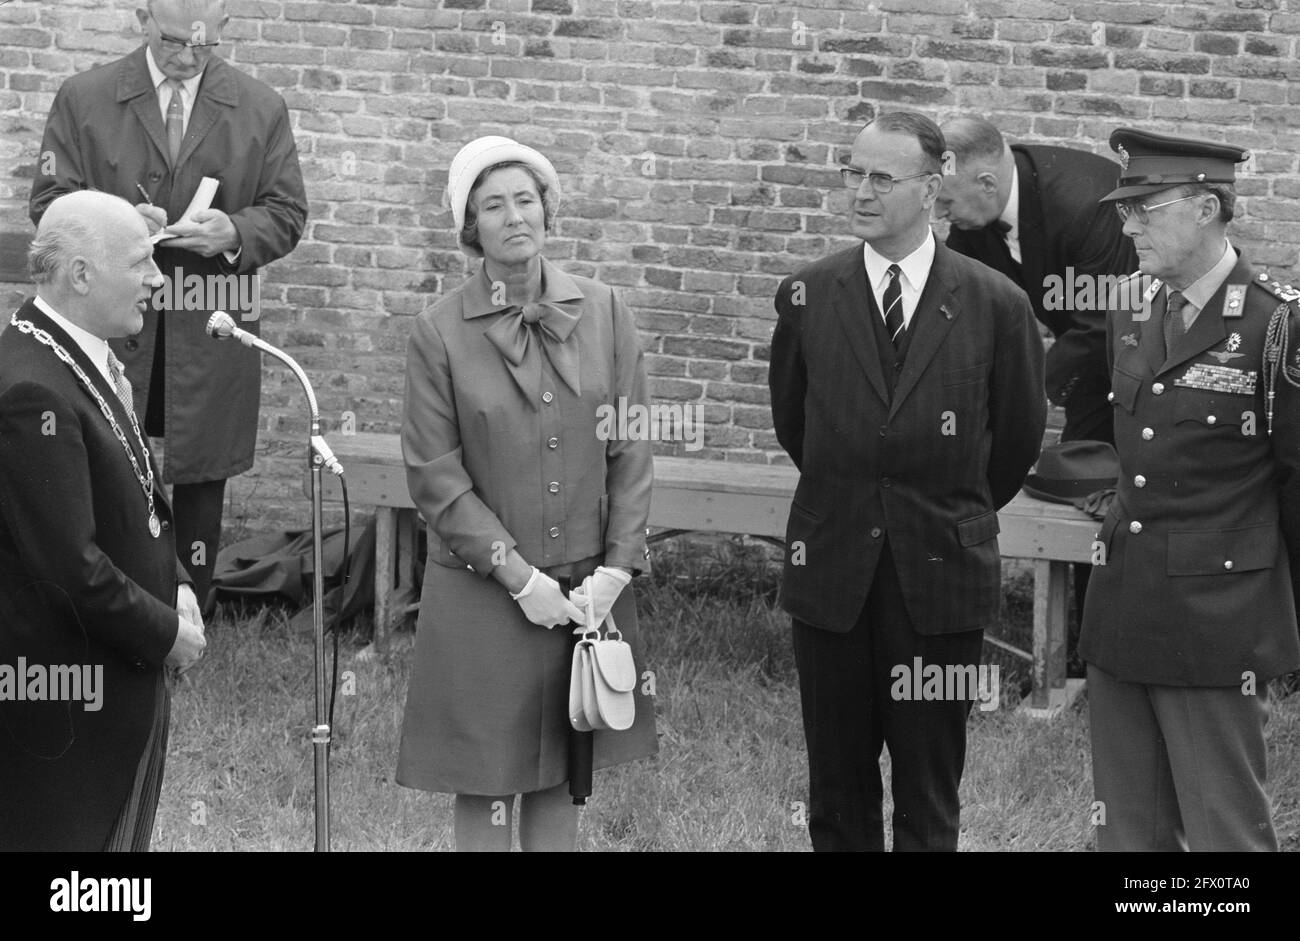 HRH Prince Bernhard opens expansion of the Fortress Museum in Naarden Prince Bernhard puts fuse in a cannon, 7 May 1969, museums, openings, princes, The Netherlands, 20th century press agency photo, news to remember, documentary, historic photography 1945-1990, visual stories, human history of the Twentieth Century, capturing moments in time Stock Photo